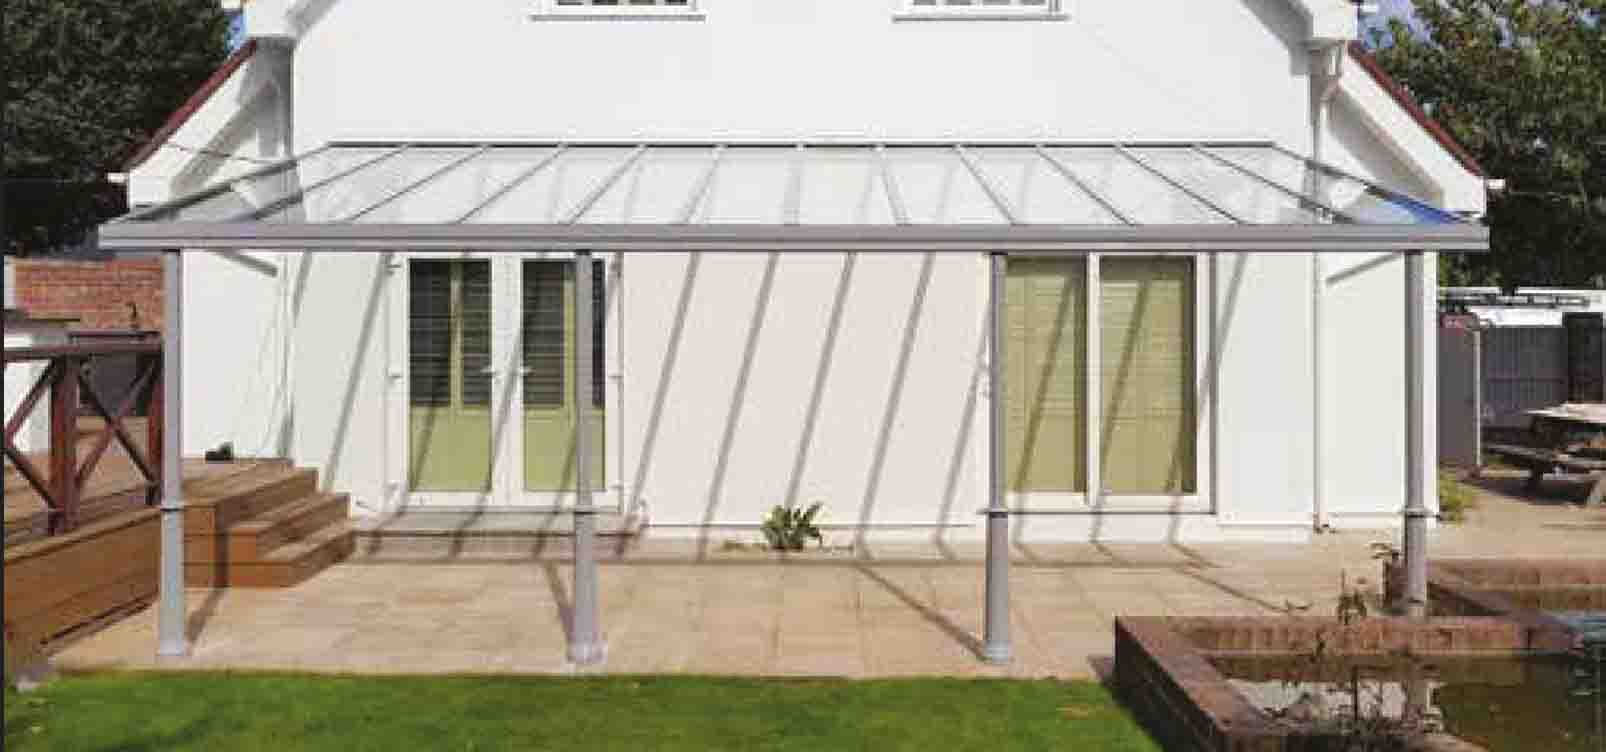 Laen to glass roofs & verandas image from canopies.ie